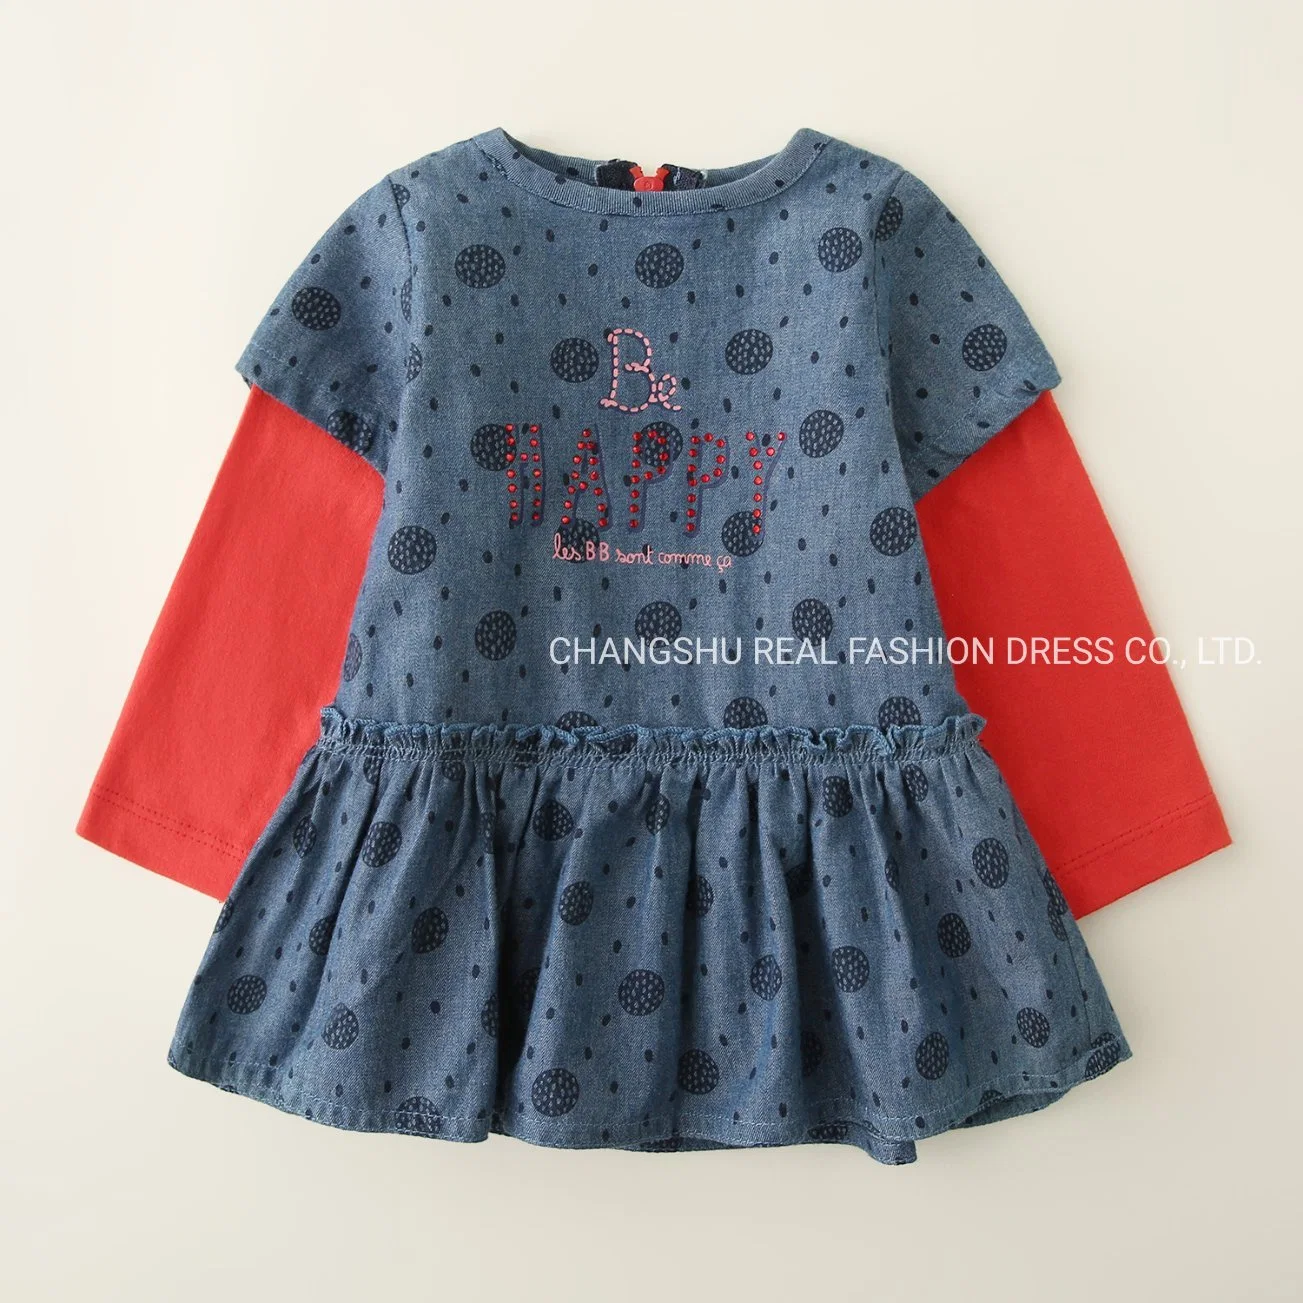 Children Clothes Girl Kids Woven Denim Dress Wear with Printing and Studs